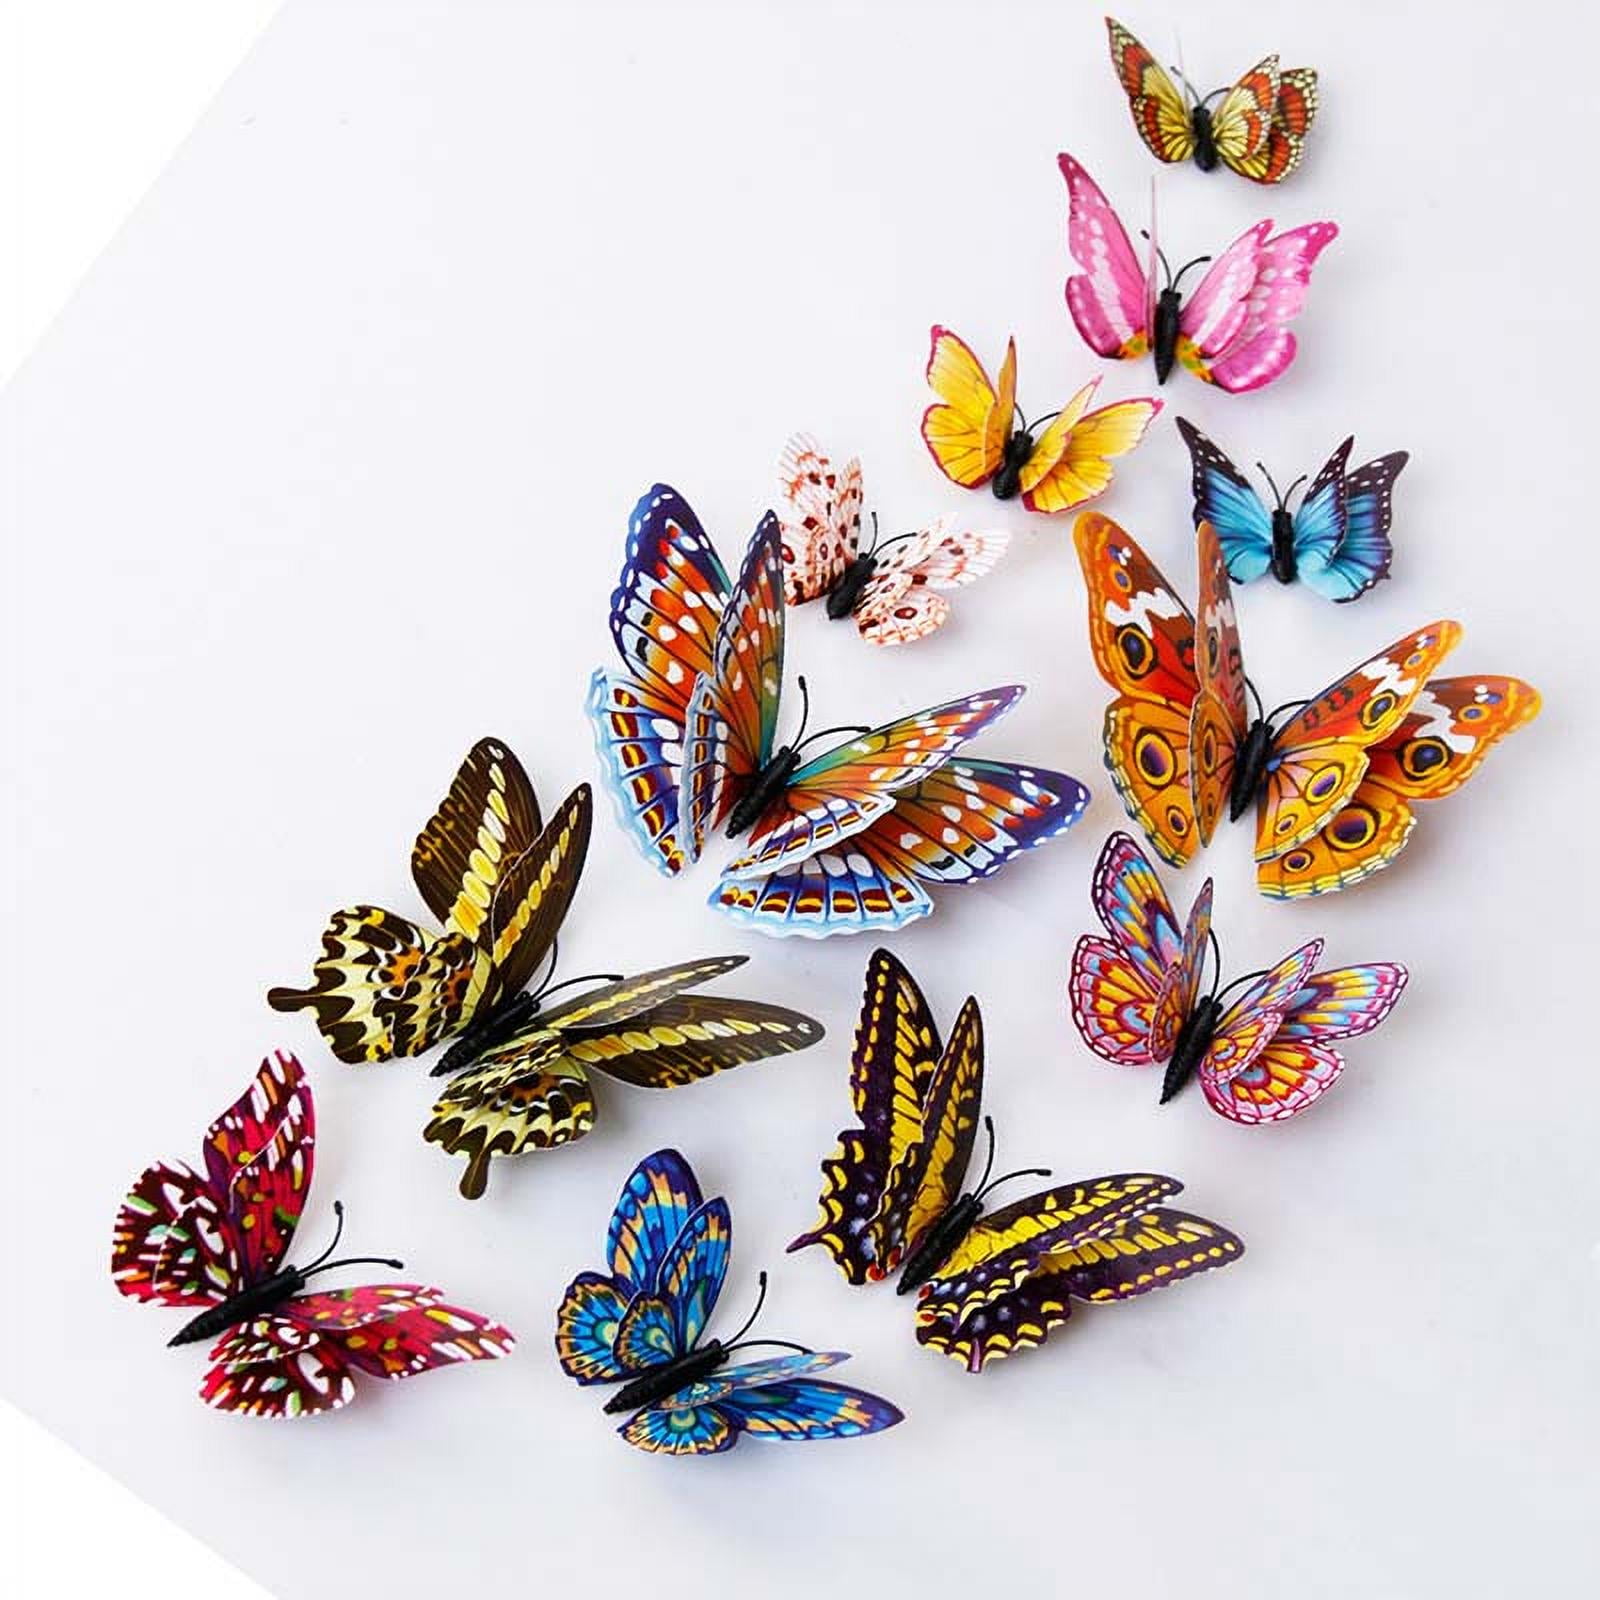 12 Pcs Decorative 3D Butterfly Magnet Wall Stickers W/ Removable for Home Black 